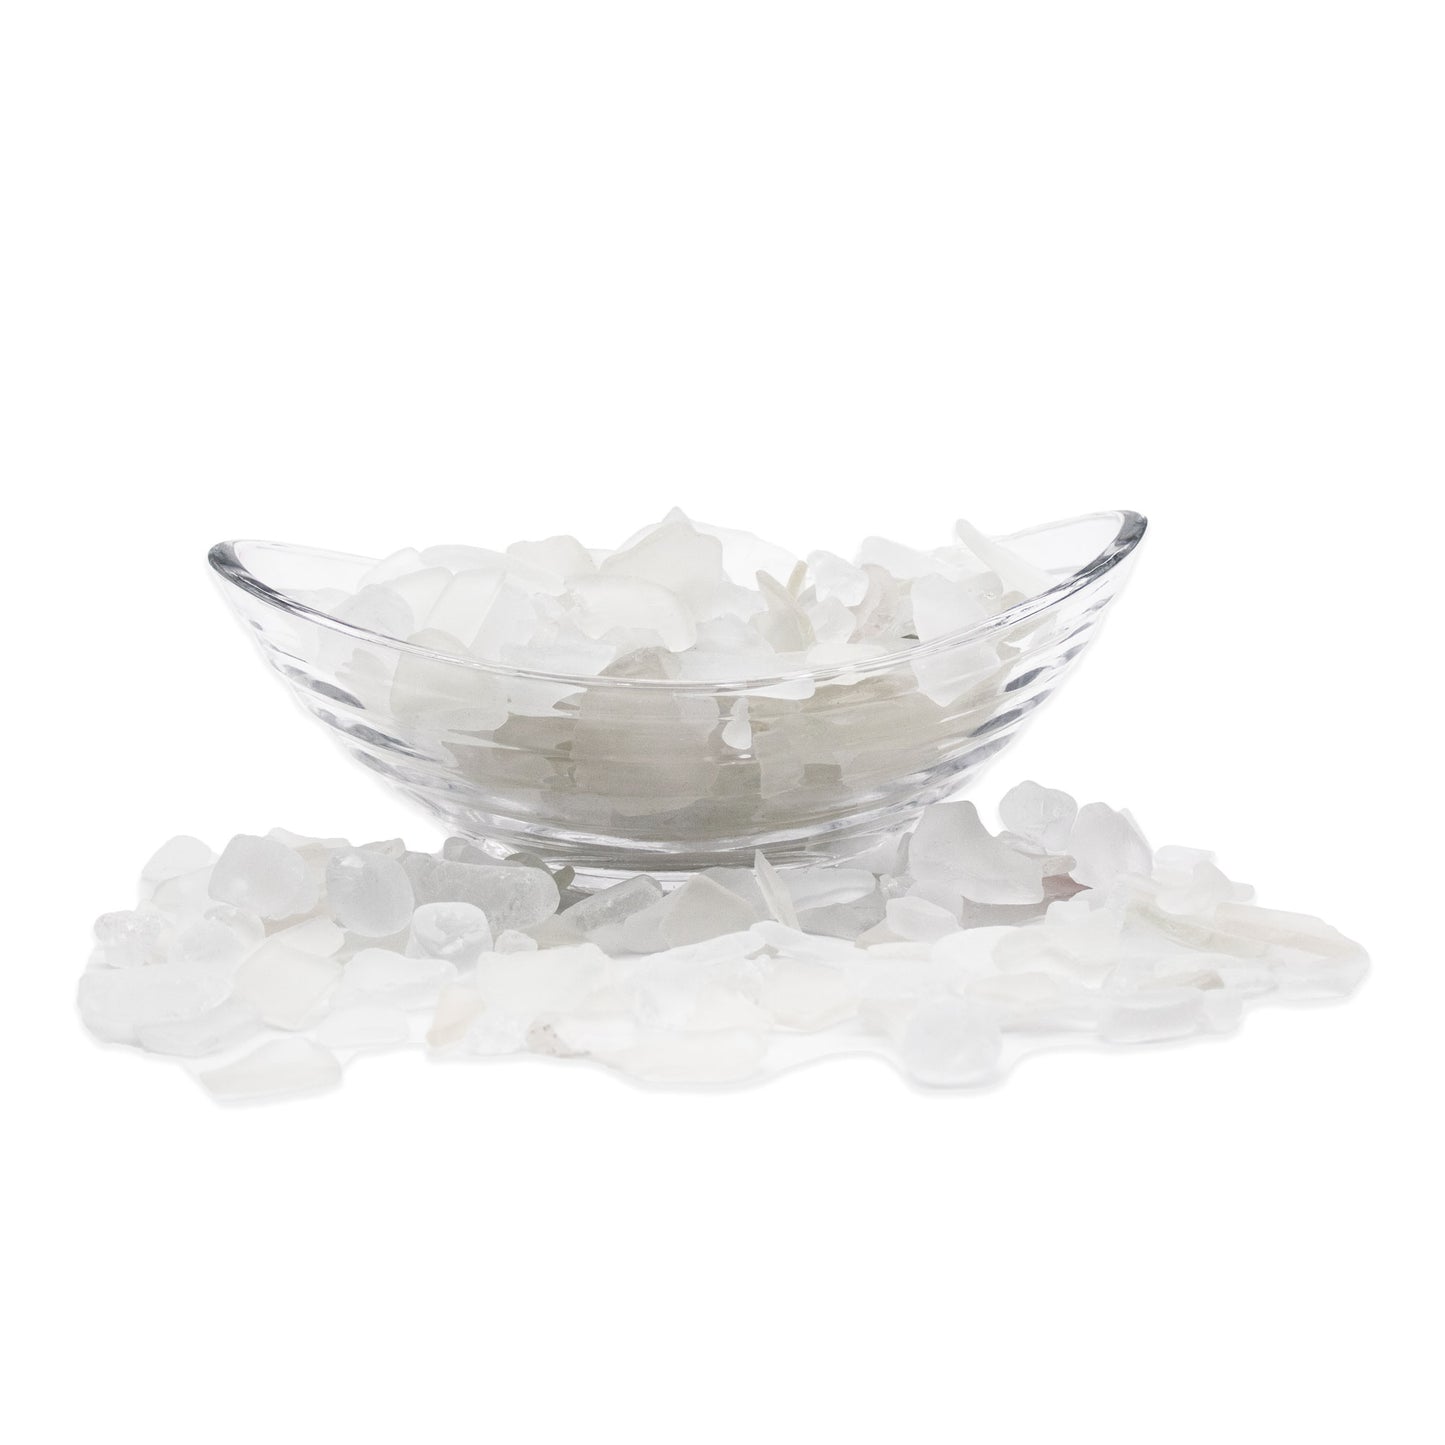 White Frosted Sea Glass Pebbles - 4 lb